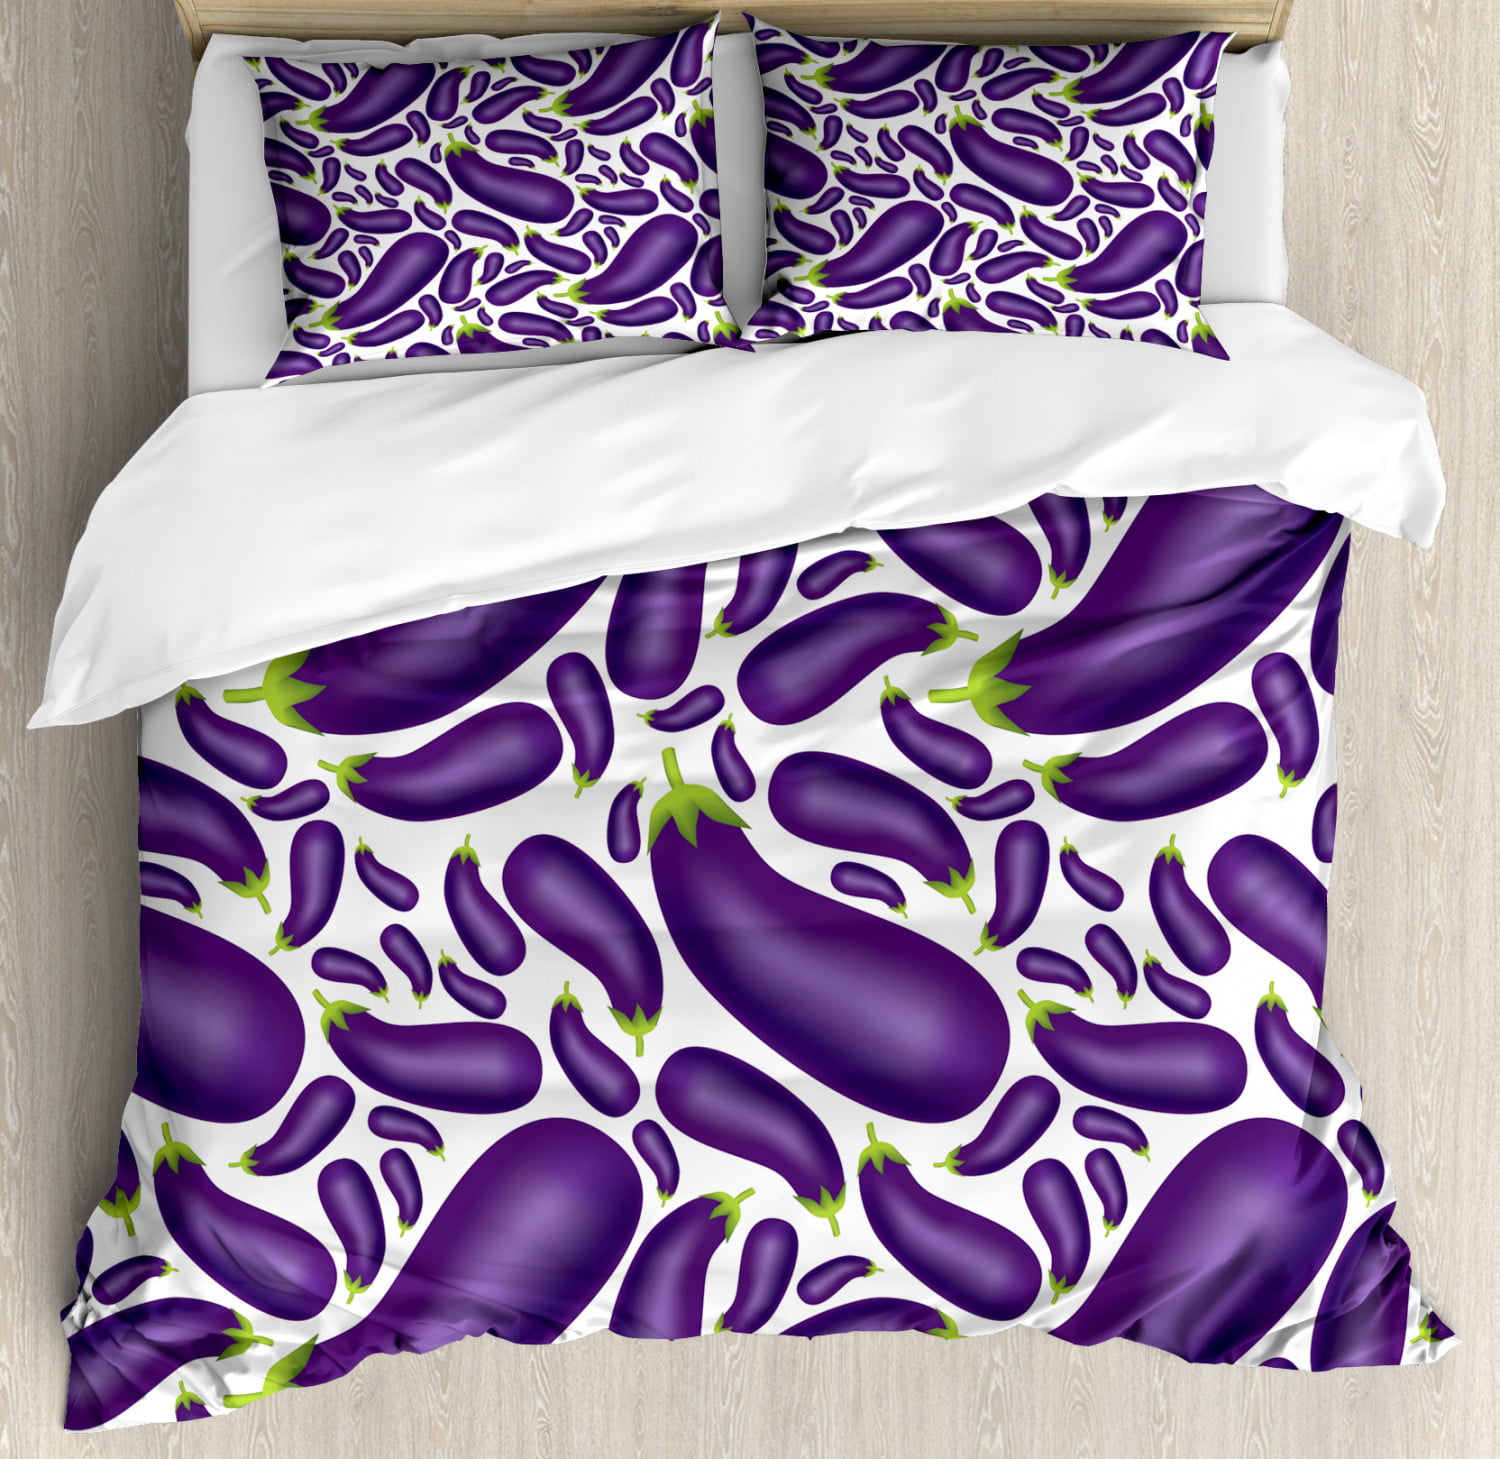 100% Cotton King Size Aubergine 200TC Bed Set Duvet Quilt Cover With Pillowcases 